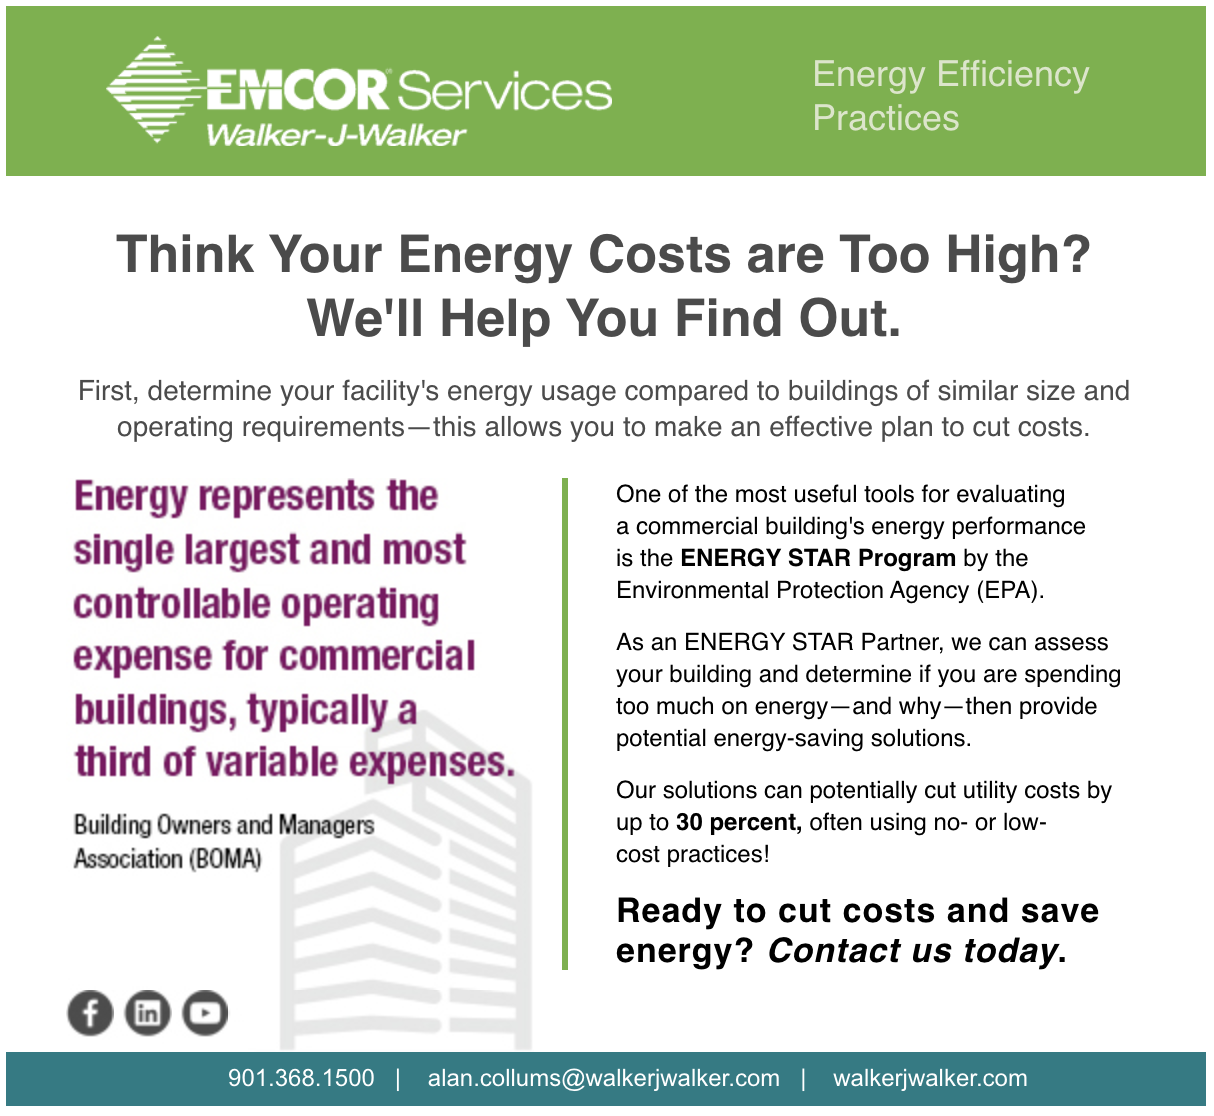 Think Your Energy Costs are Too High? We'll Help You Find Out.